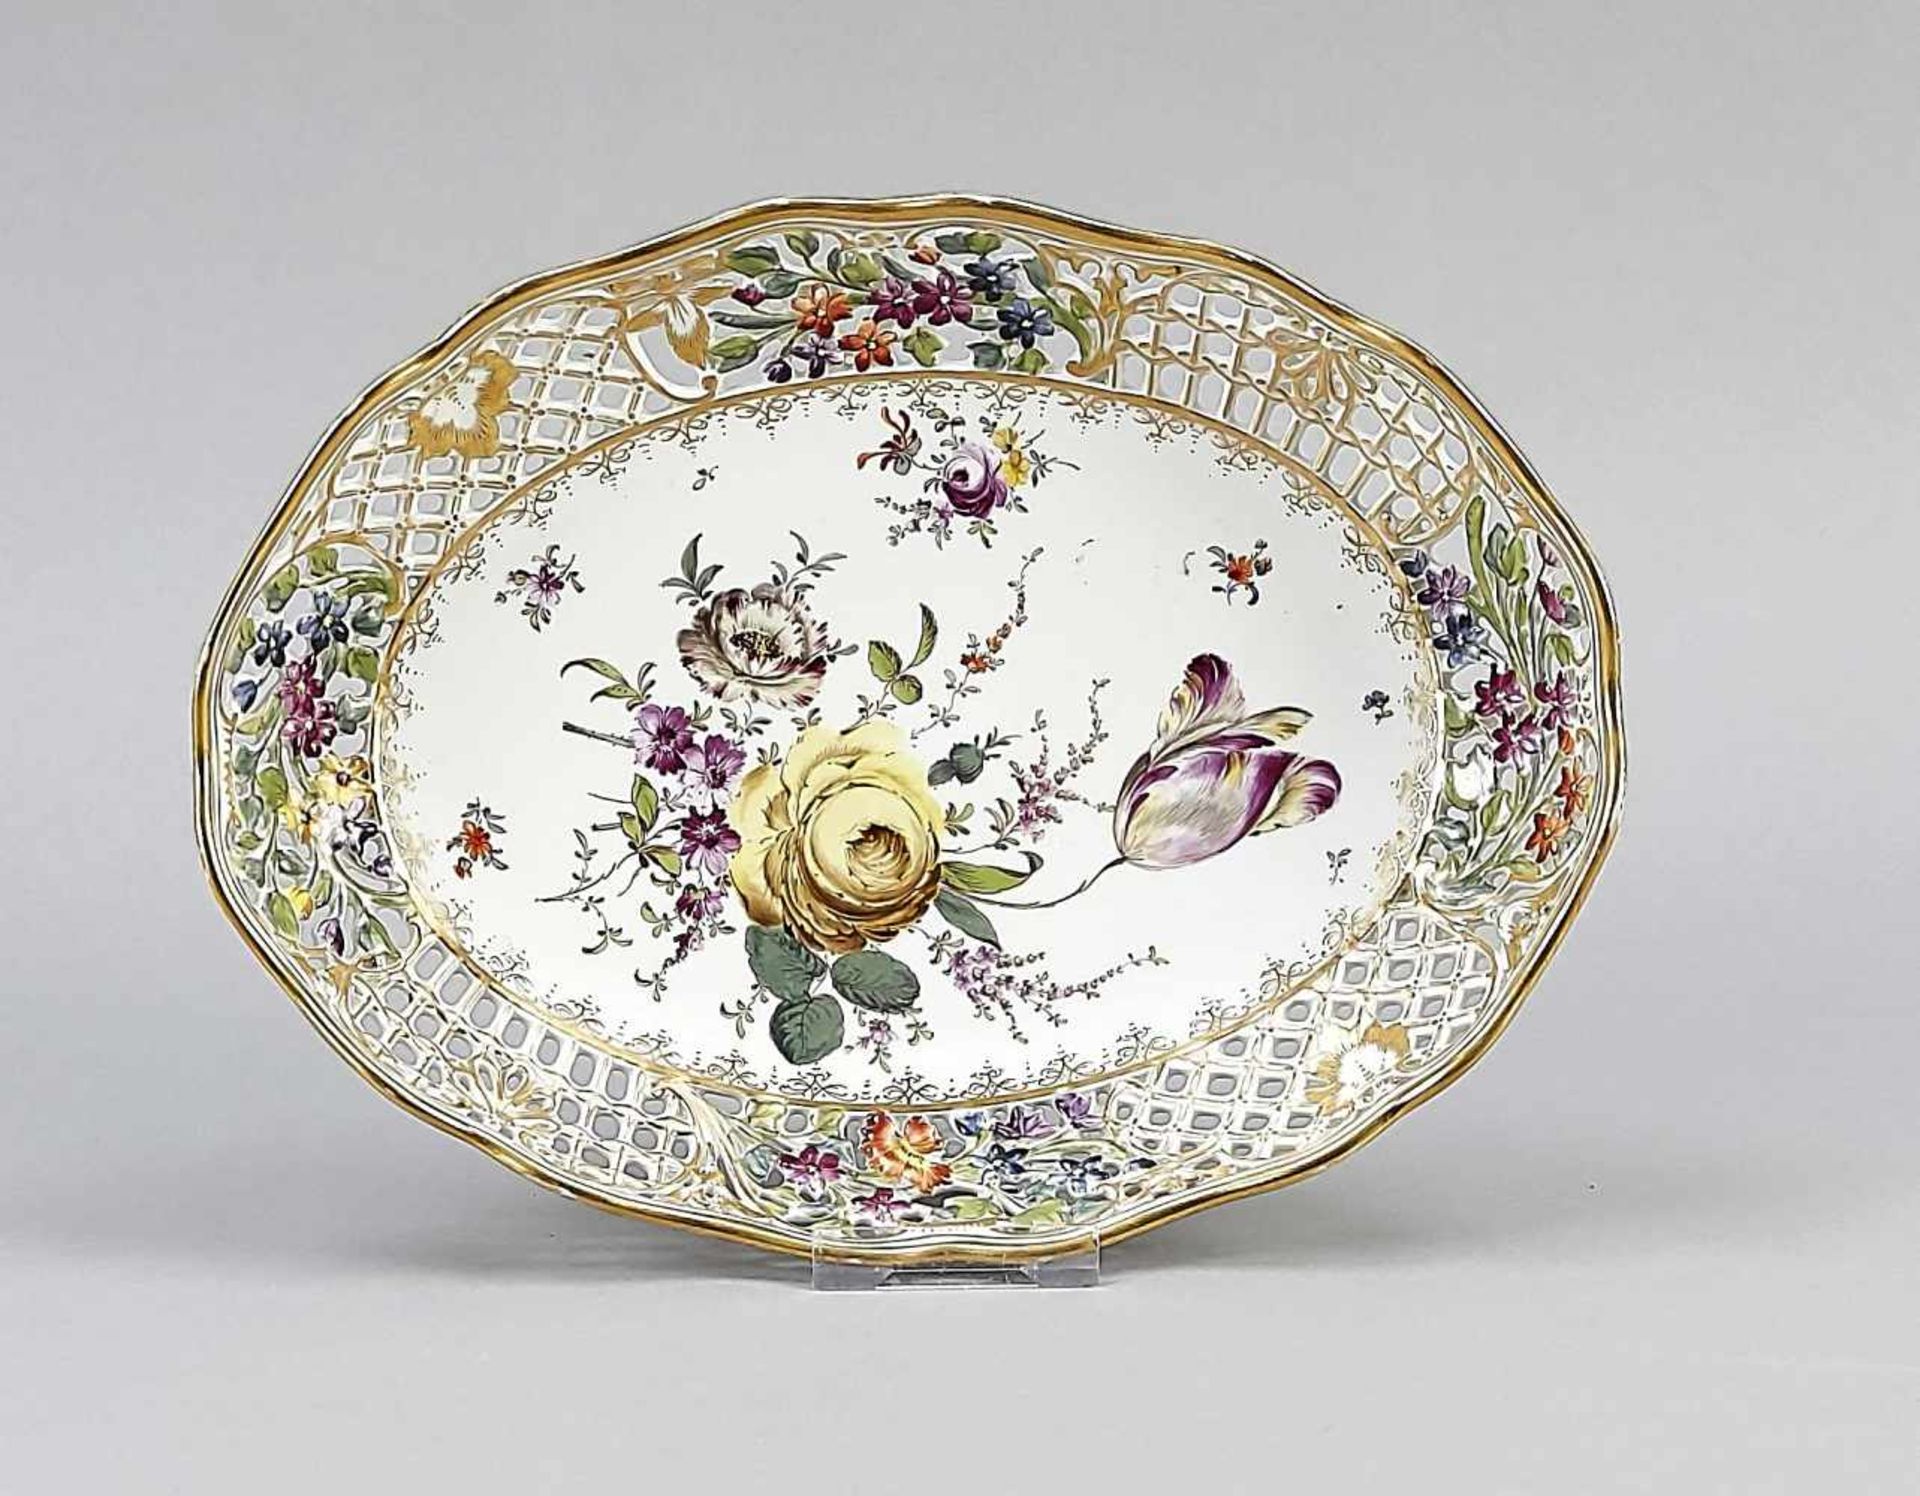 Oval basket bowl, Drseden, 20th century, polychrome flower painting in mirror and on the